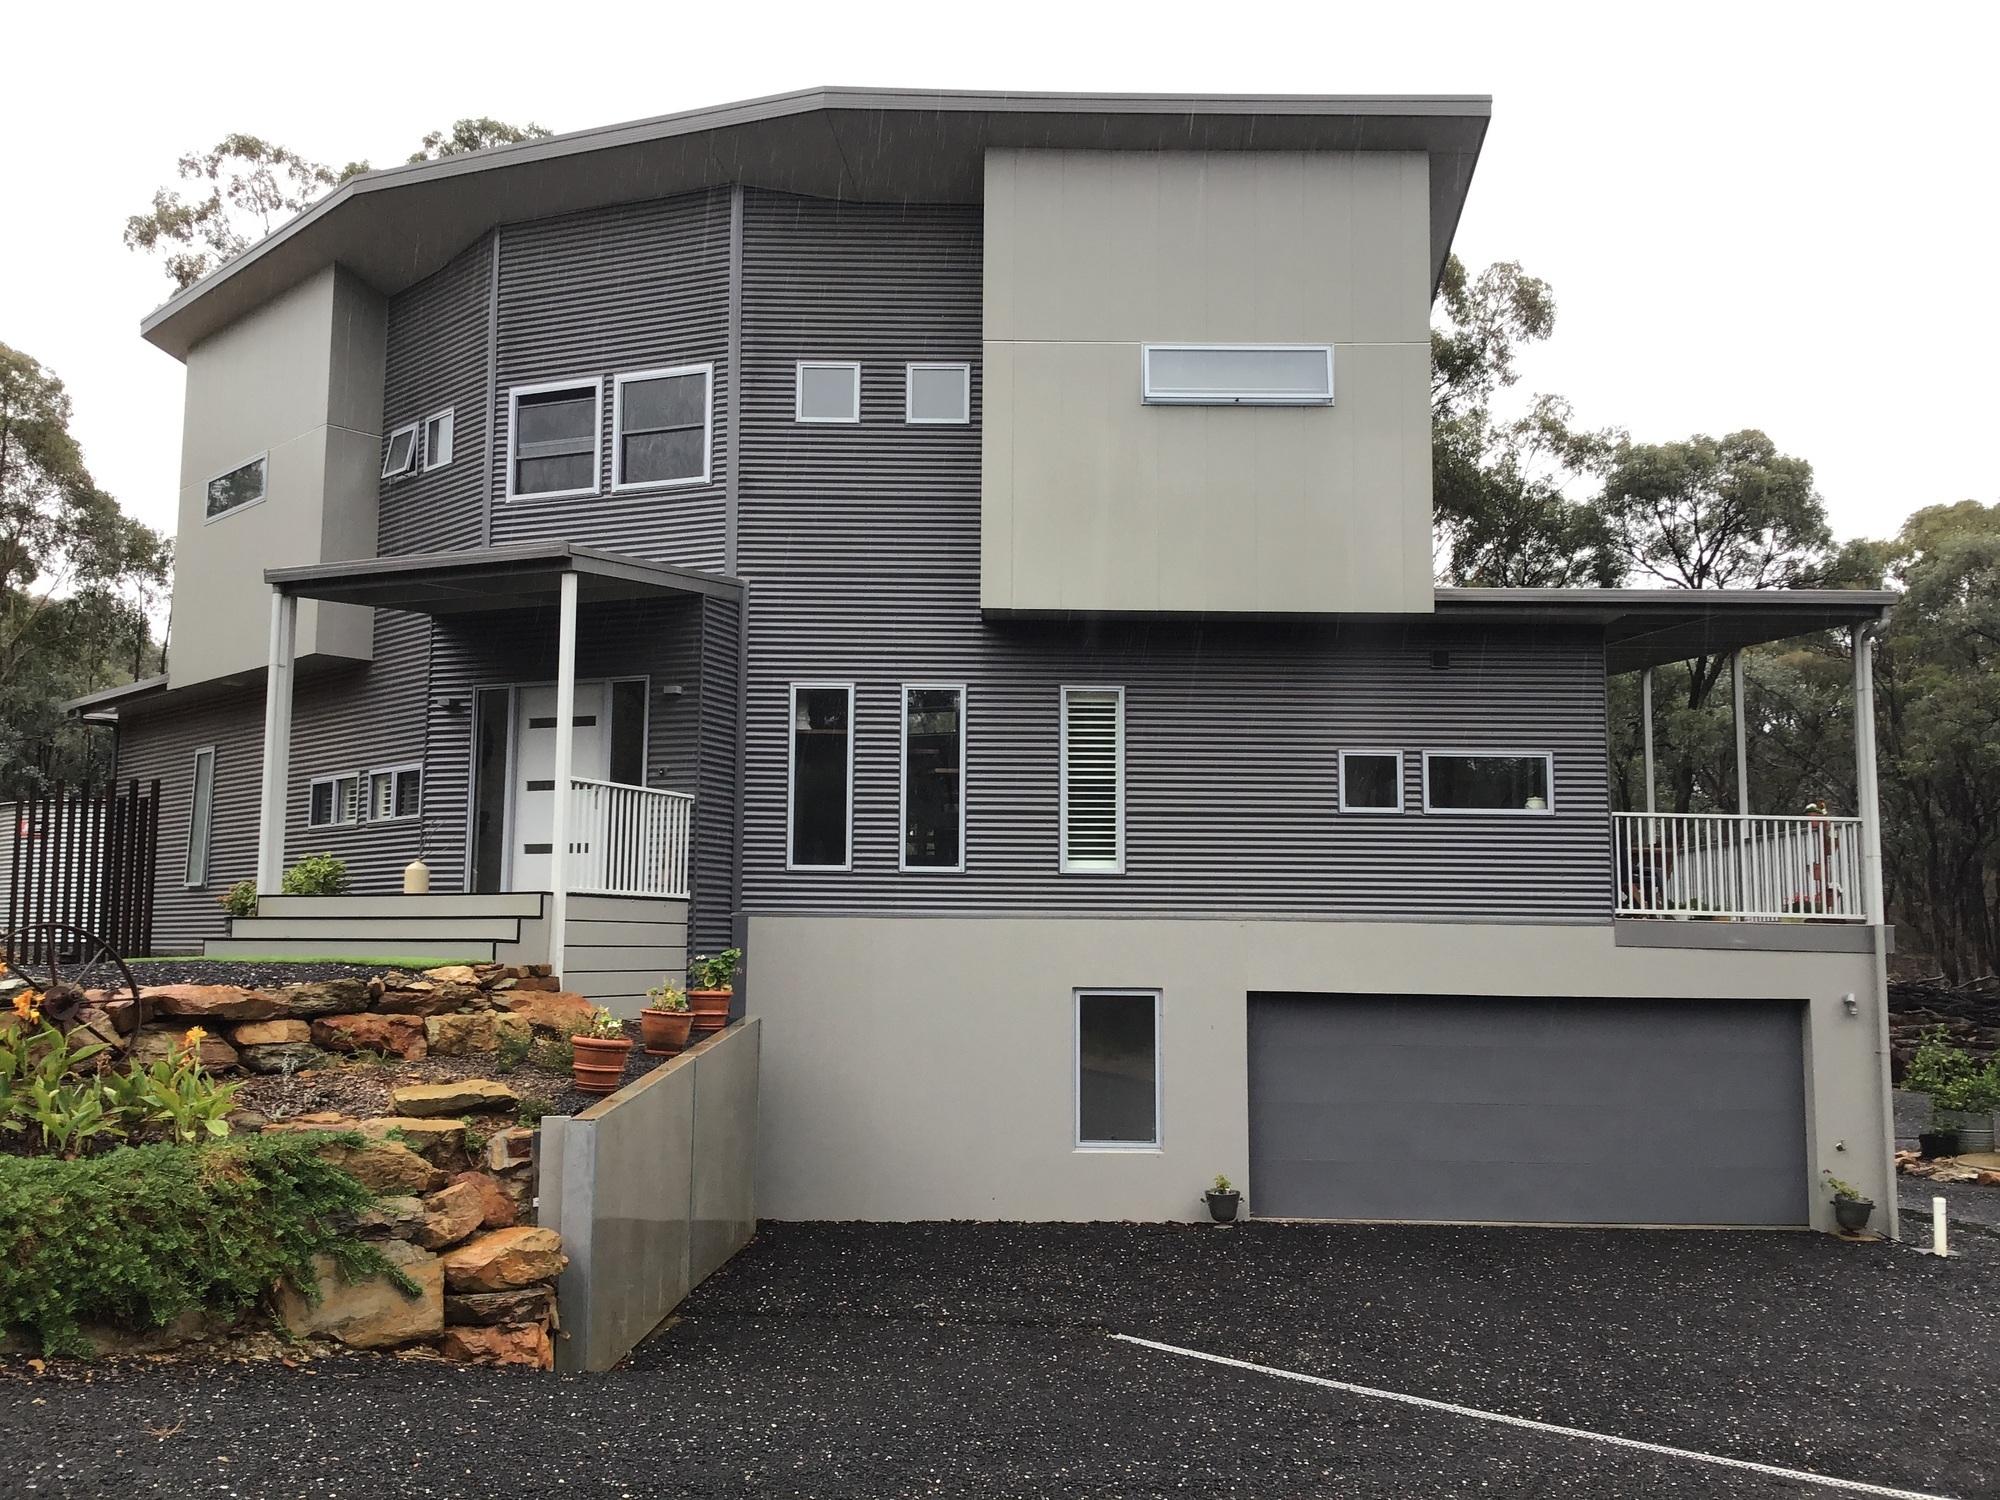 June from Mandurang, VIC loves COLORBOND® steel. Roofing, Guttering & Fascia, Garage Doors, Walling, Sheds, Patio & Pergola made from COLORBOND® steel in the colours Basalt® and Shale Grey®